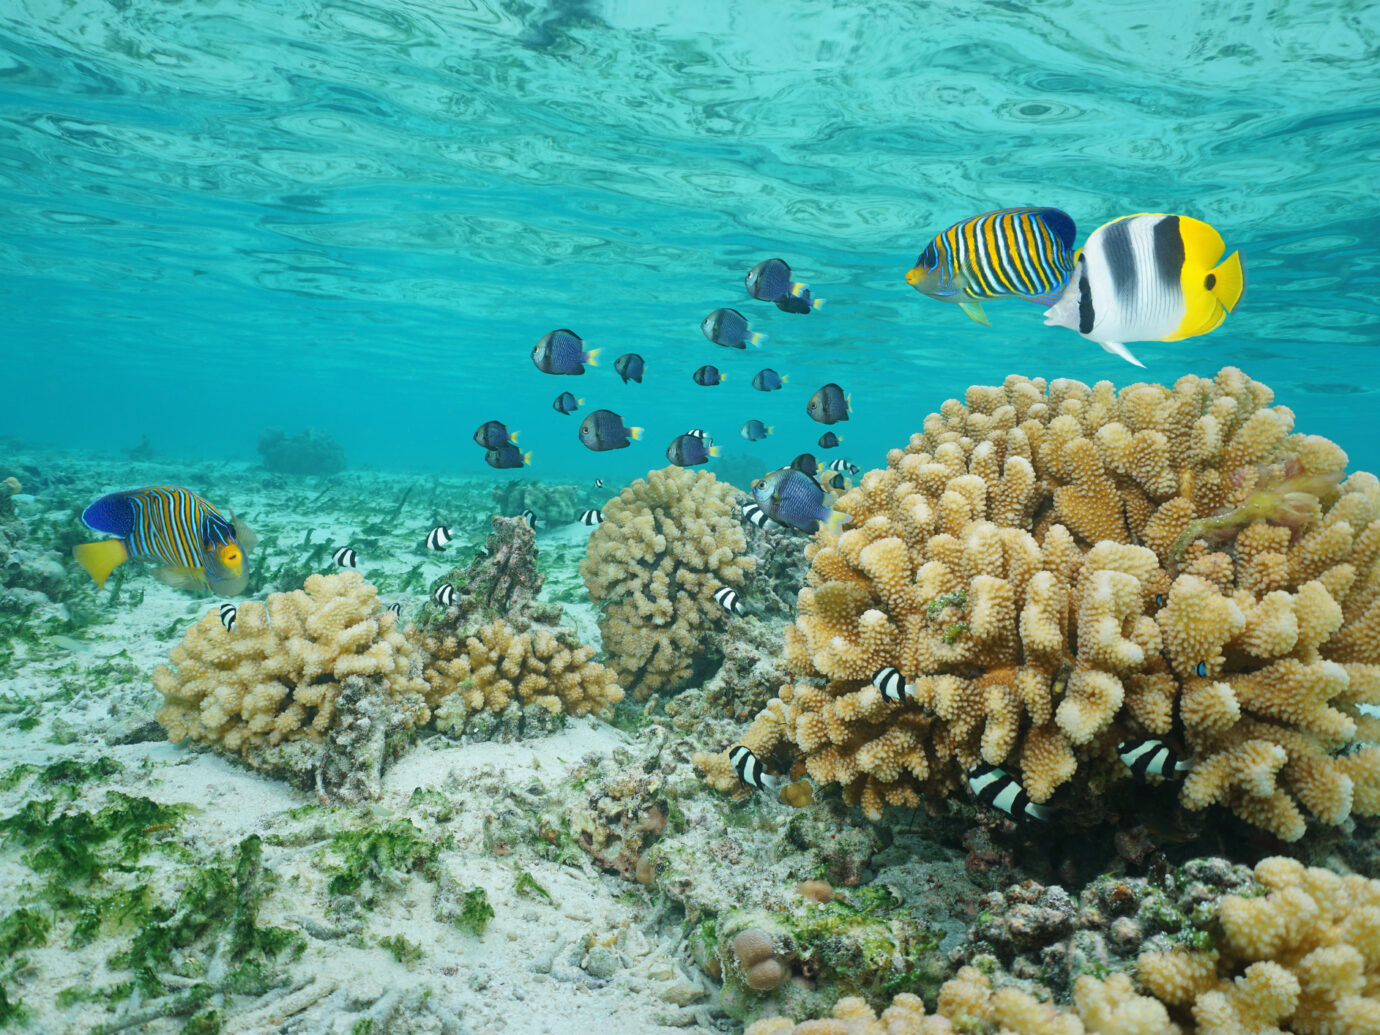 Tropical fish and cauliflower coral in shallow water, Moorea lagoon, Pacific ocean, French Polynesia